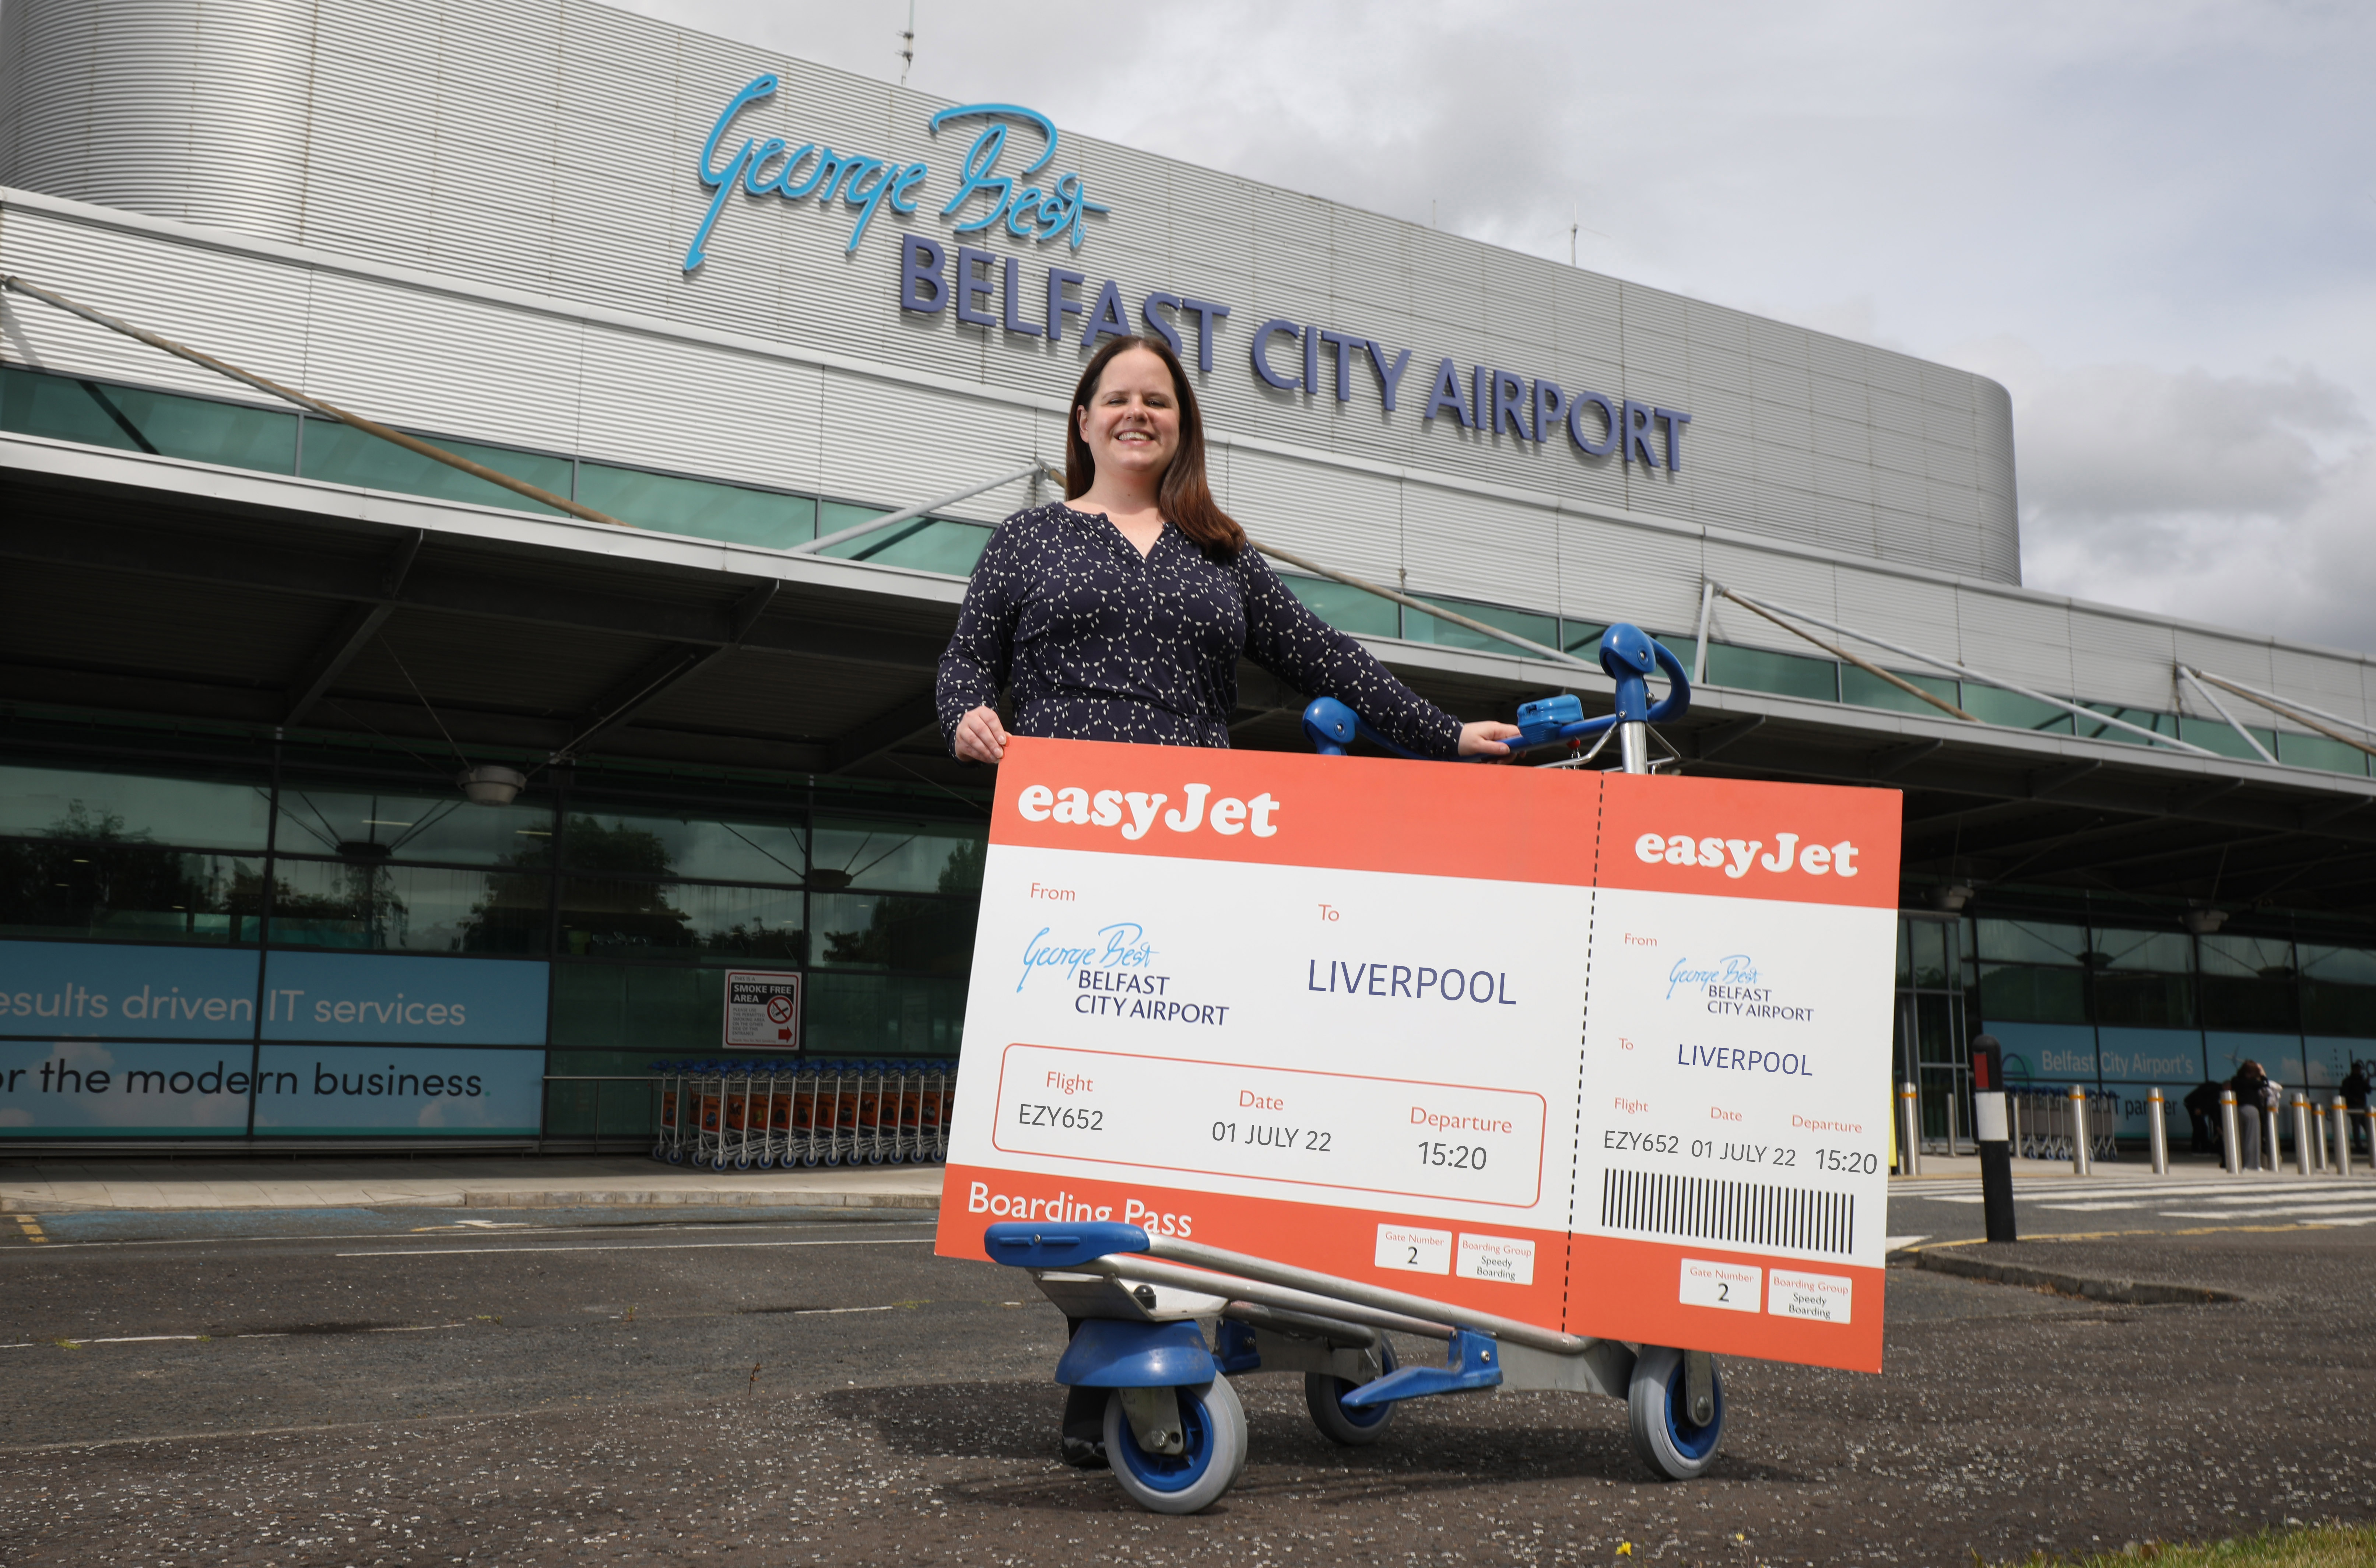 Liverpool flights take off from Belfast City Airport with easyjet